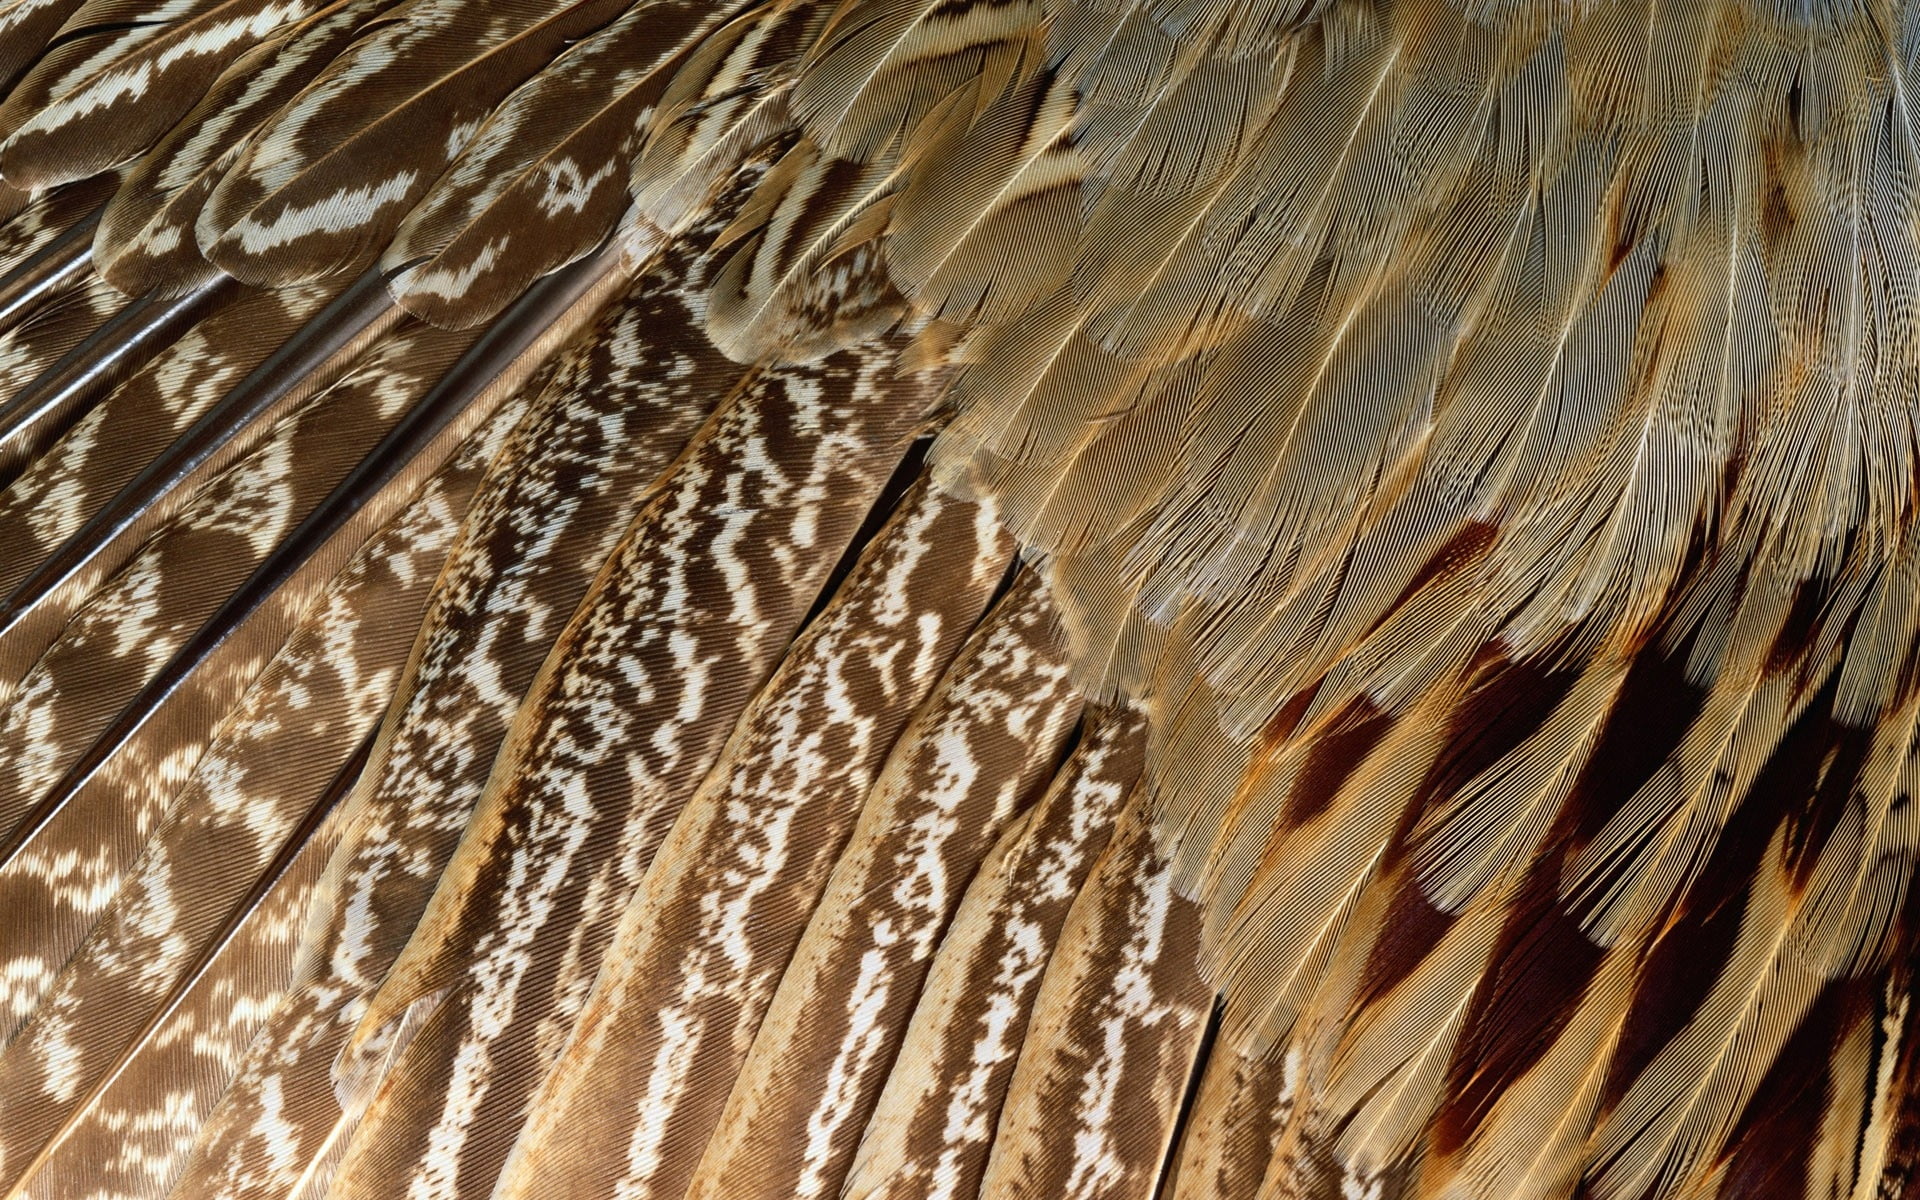 animals - Bird identification from feathers - brown-black feathers